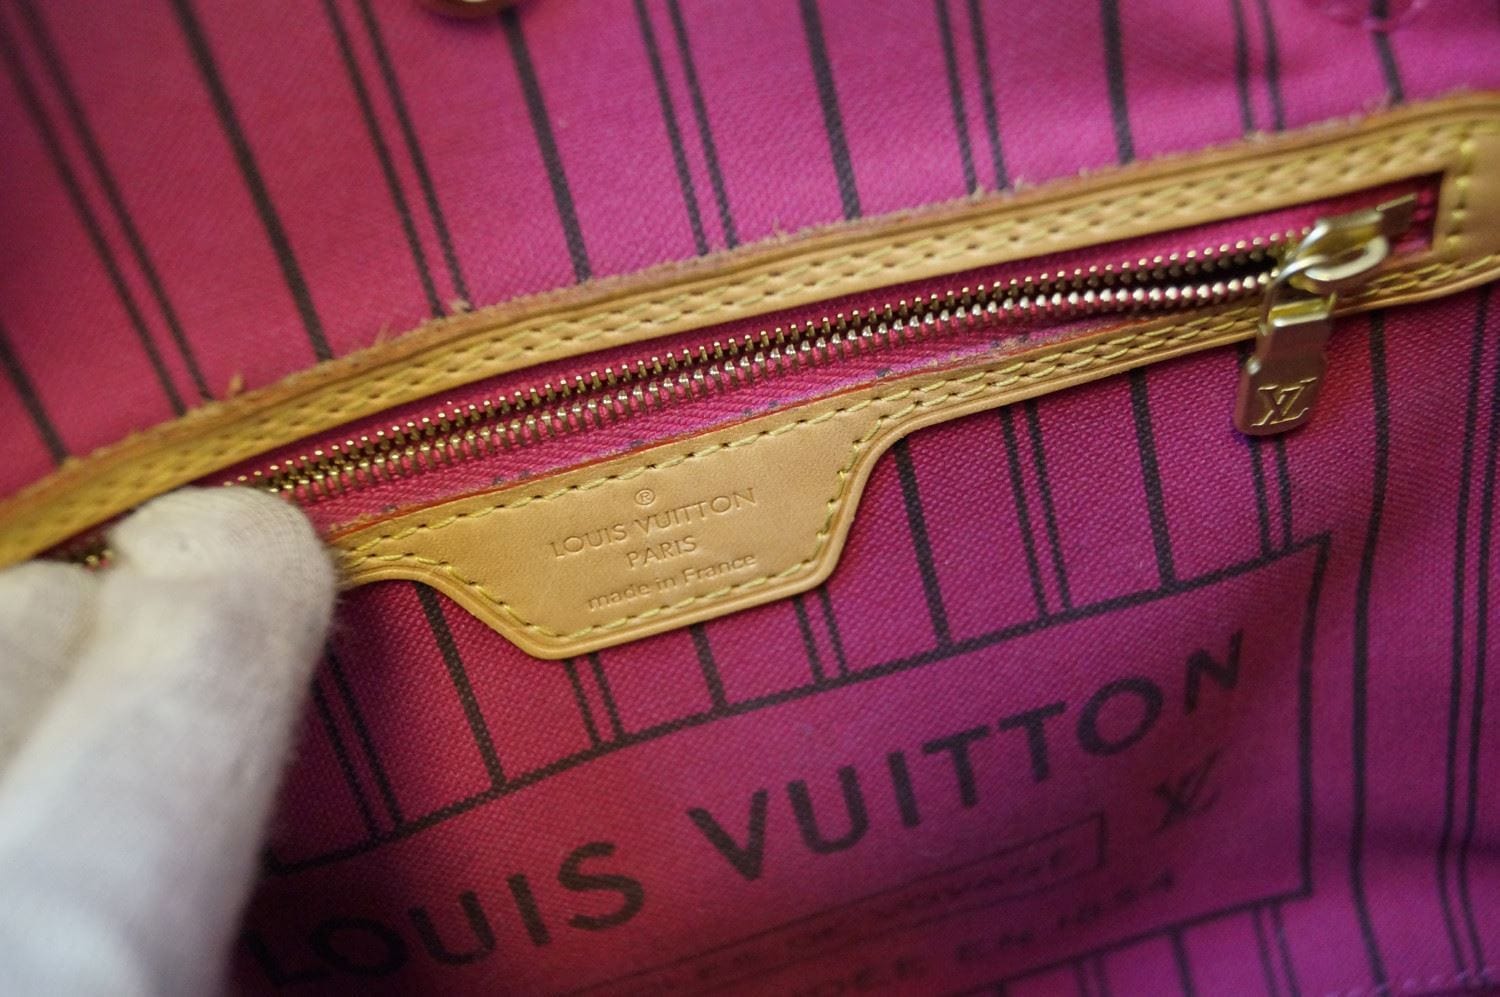 Louis Vuitton - Authenticated Neverfull Handbag - Cloth Purple for Women, Never Worn, with Tag